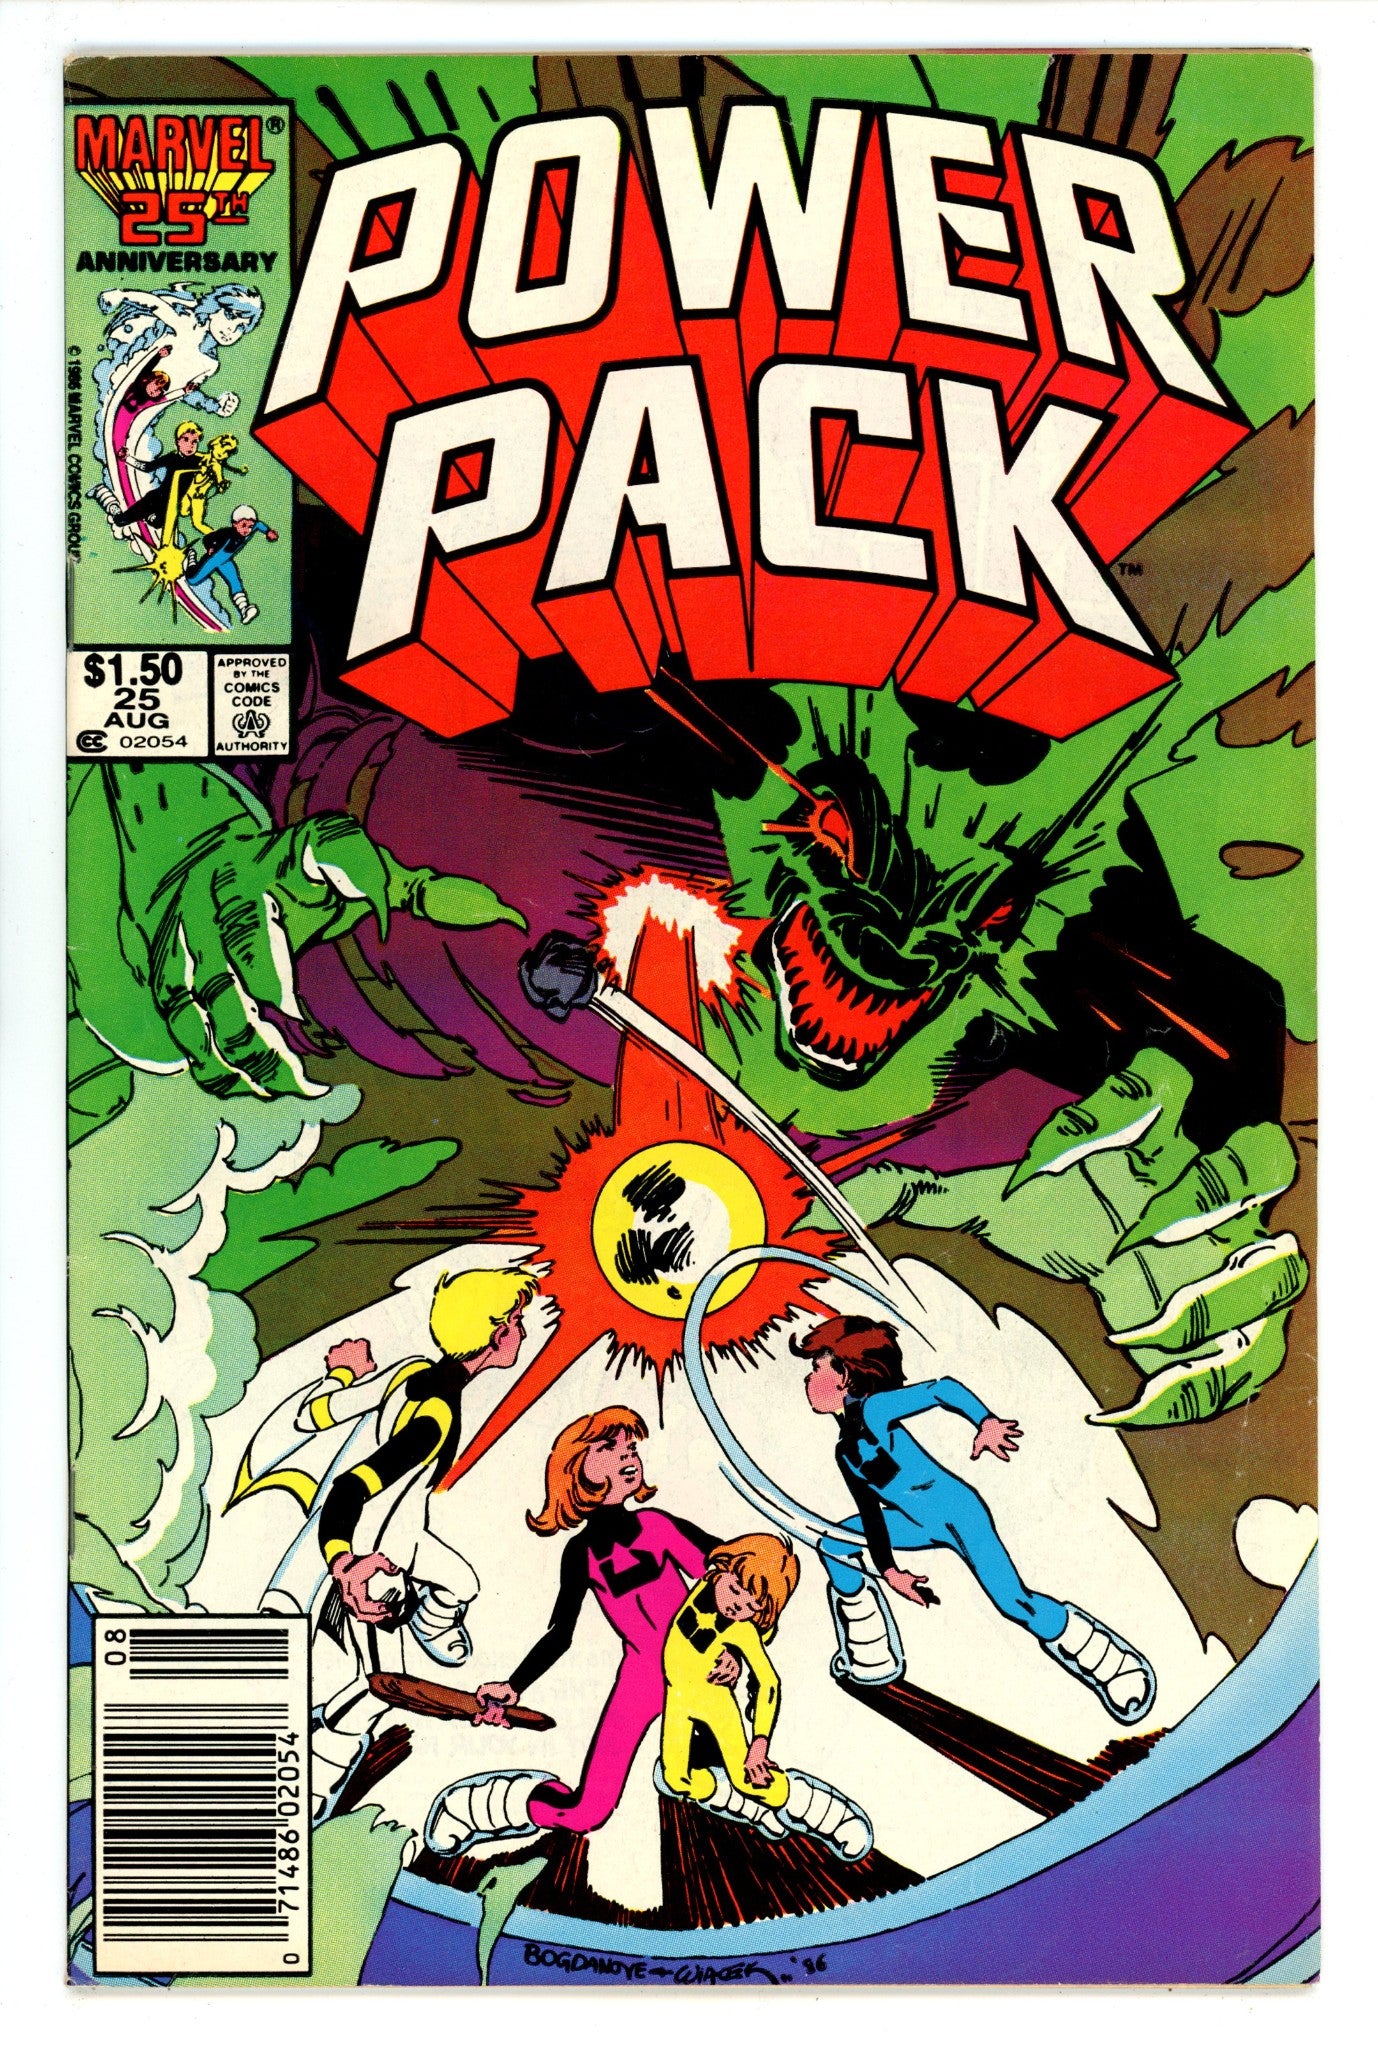 Power Pack Vol 1 25 VG+ (4.5) (1986) Canadian Price Variant 